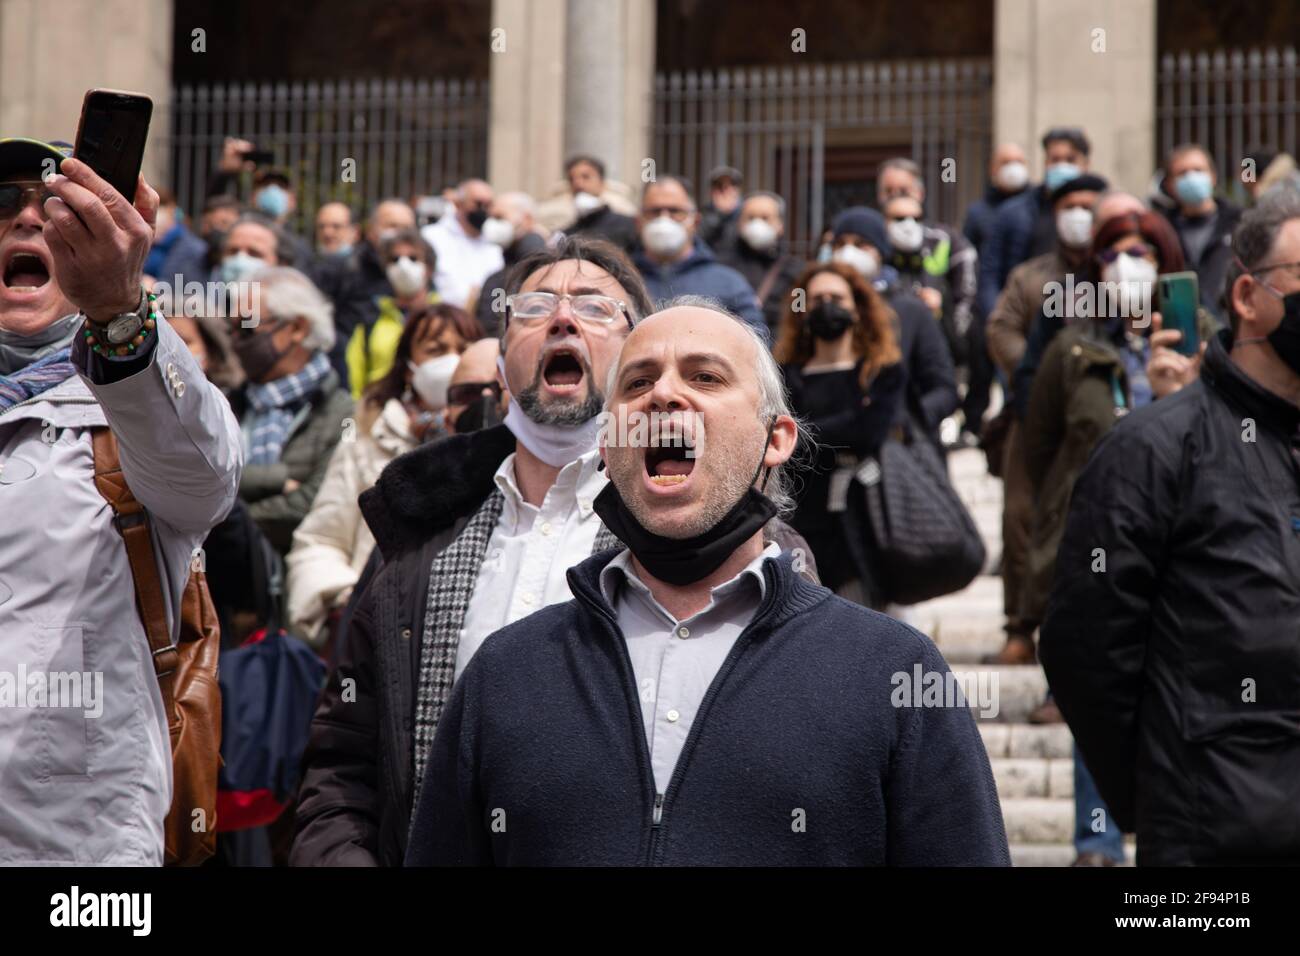 Rome, Italy. 16th Apr, 2021. Flashmob organized in Piazza del Campidoglio in Rome by the workers of the Teatro dell'Opera di Roma to protest against the downsizing of the staff of the Teatro dell'Opera. They played and sang 'Nessun Dorma' of the opera Turandot by Giacomo Puccini. (Photo by Matteo Nardone/Pacific Press) Credit: Pacific Press Media Production Corp./Alamy Live News Stock Photo